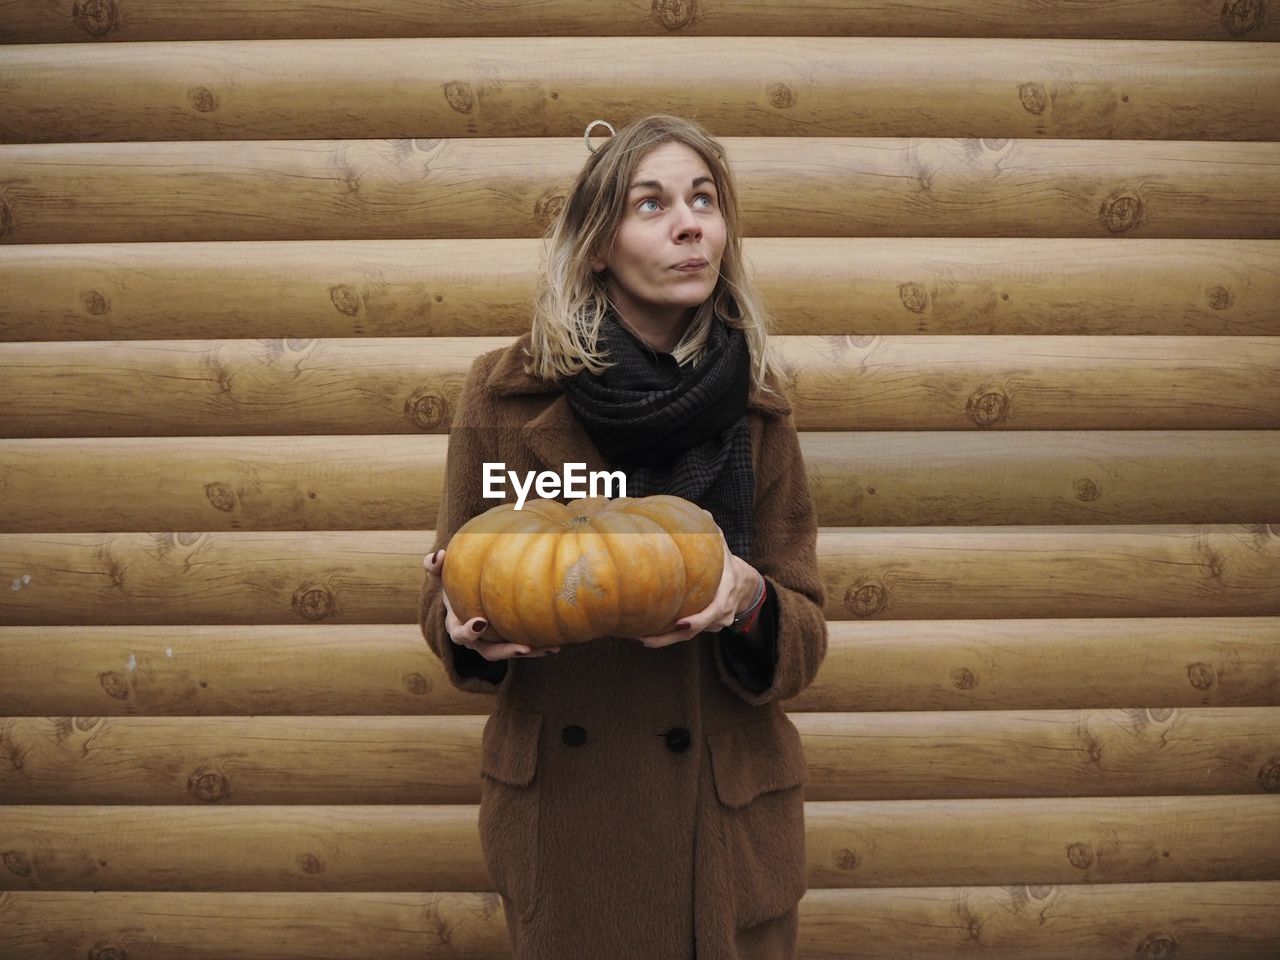 Woman holding pumpkin while standing by wooden wall